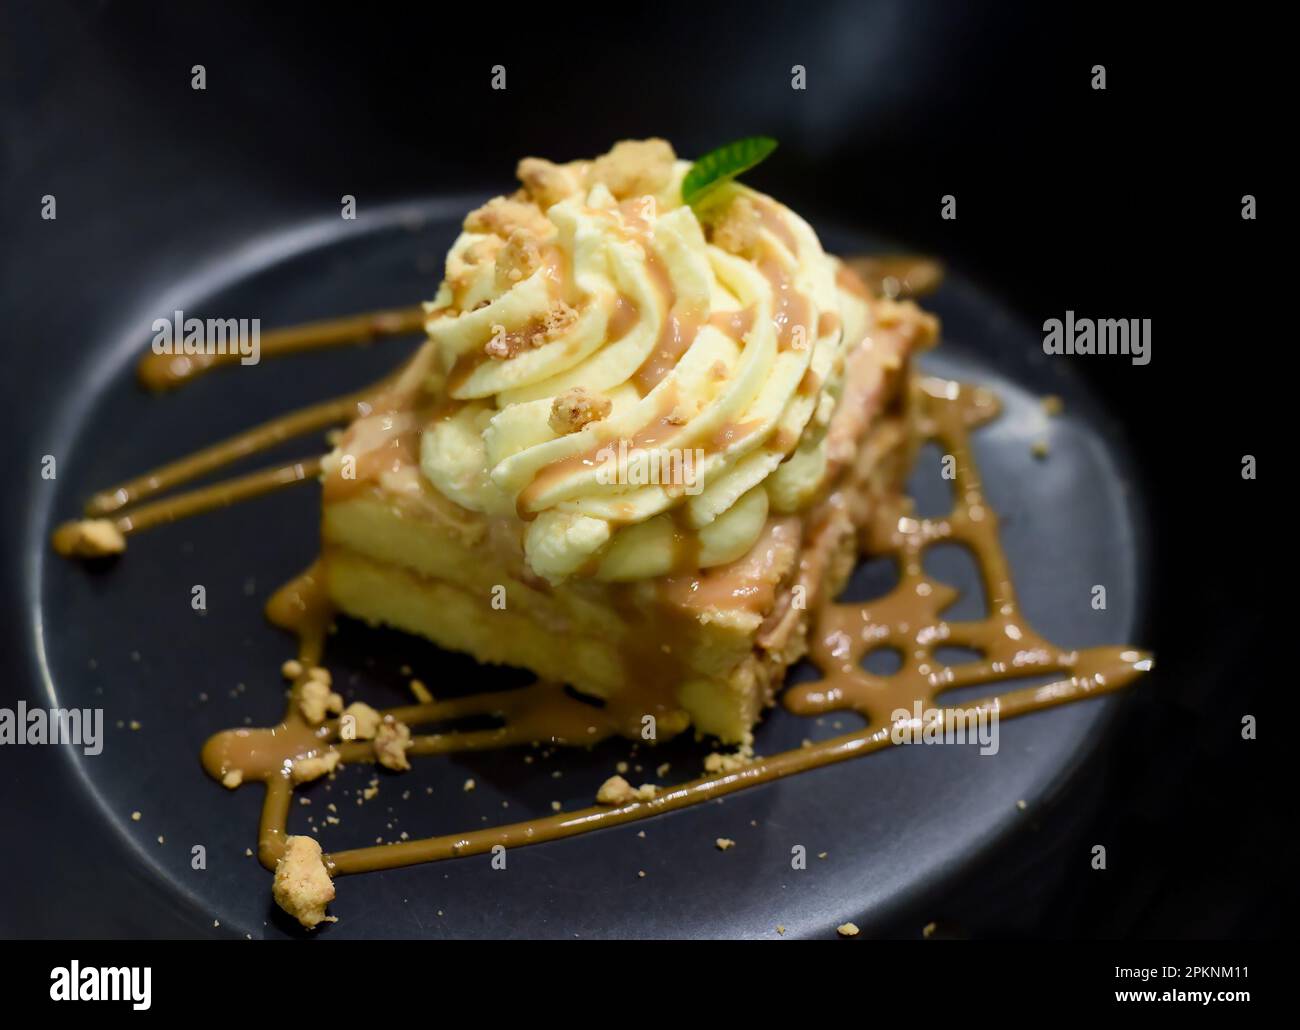 Tres leches cake or three milk cake in black plate on wooden table Stock Photo